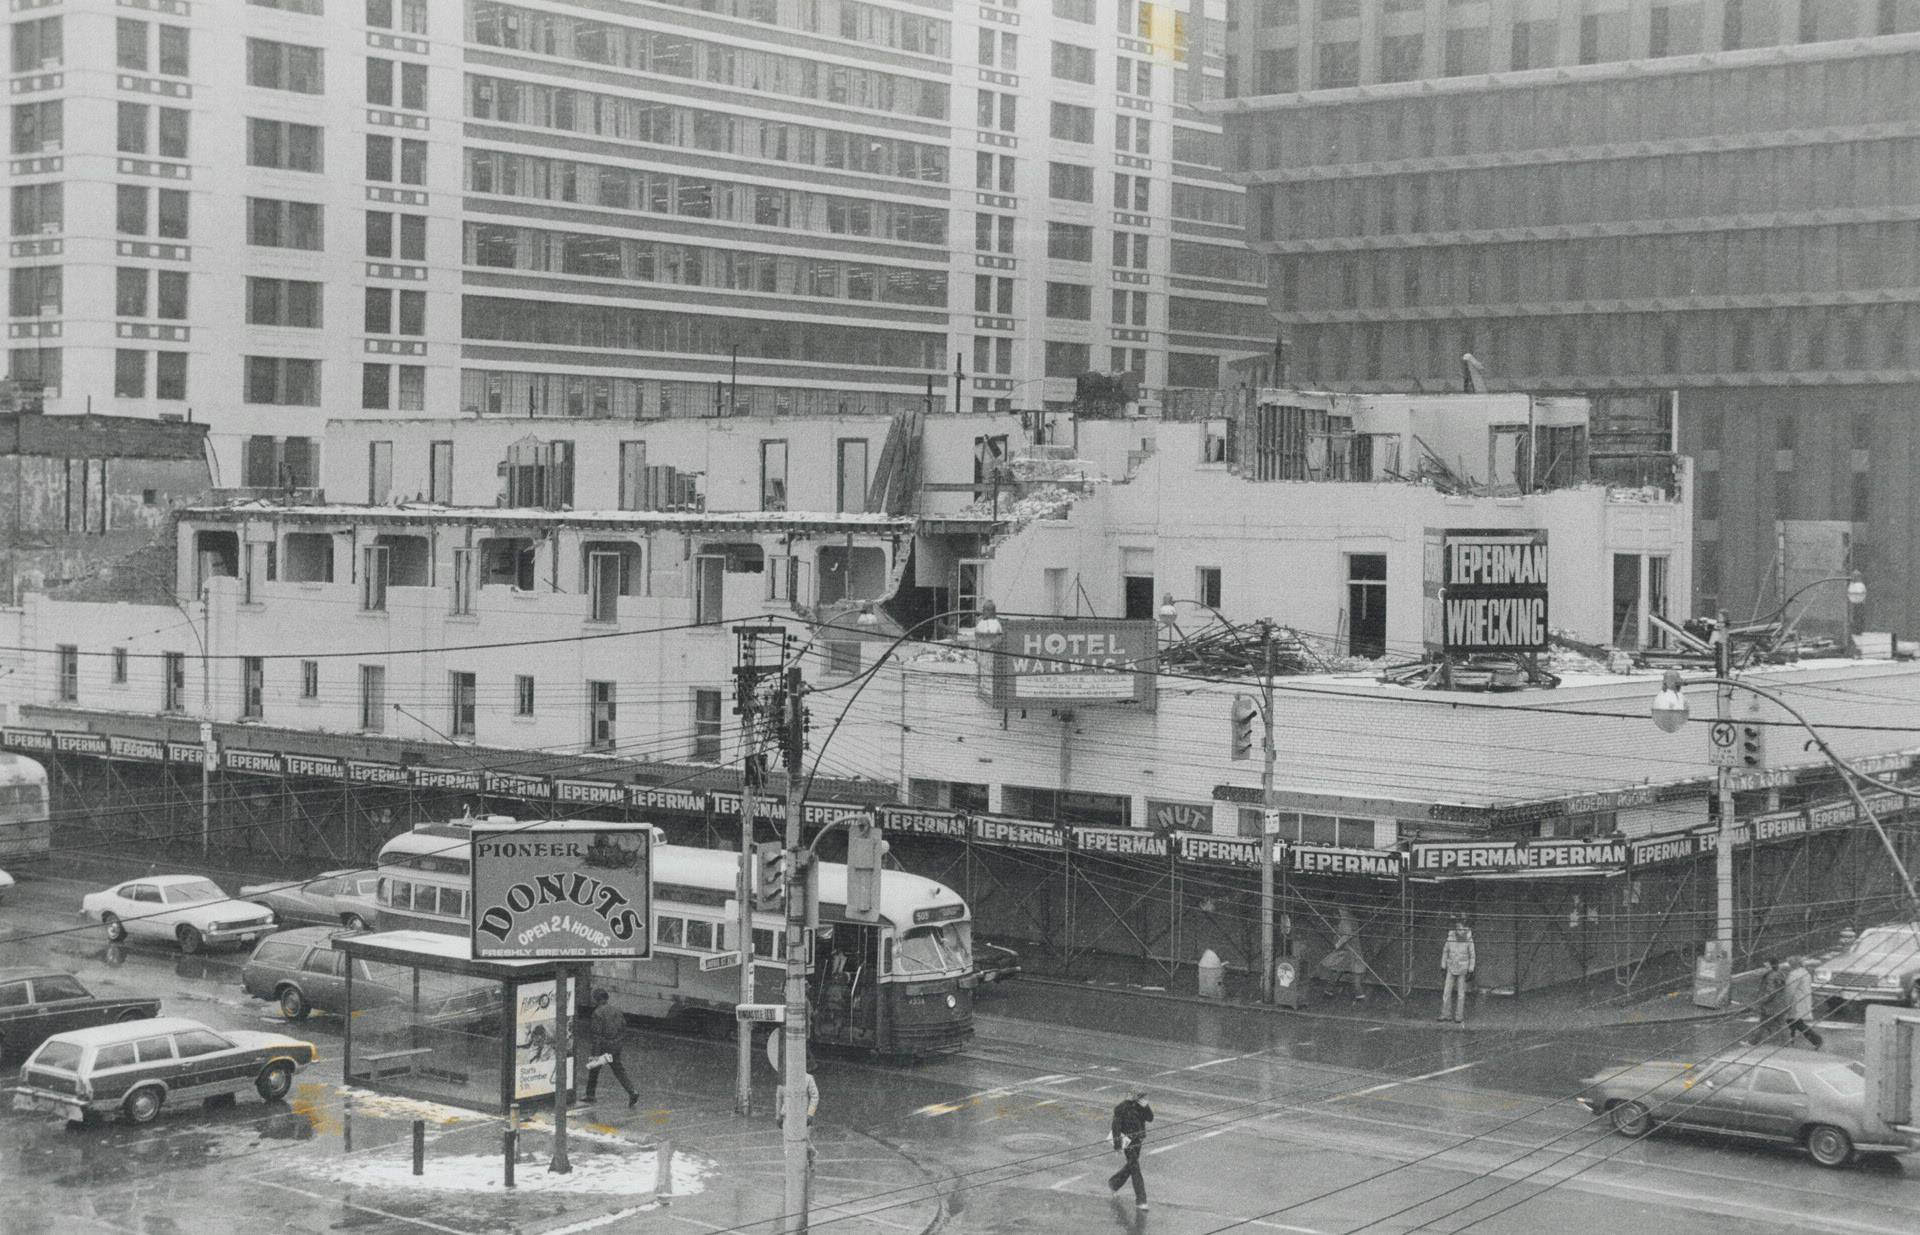 Buildings courtesy of Teperman - Demolition of the Warwick Hotel, 1981